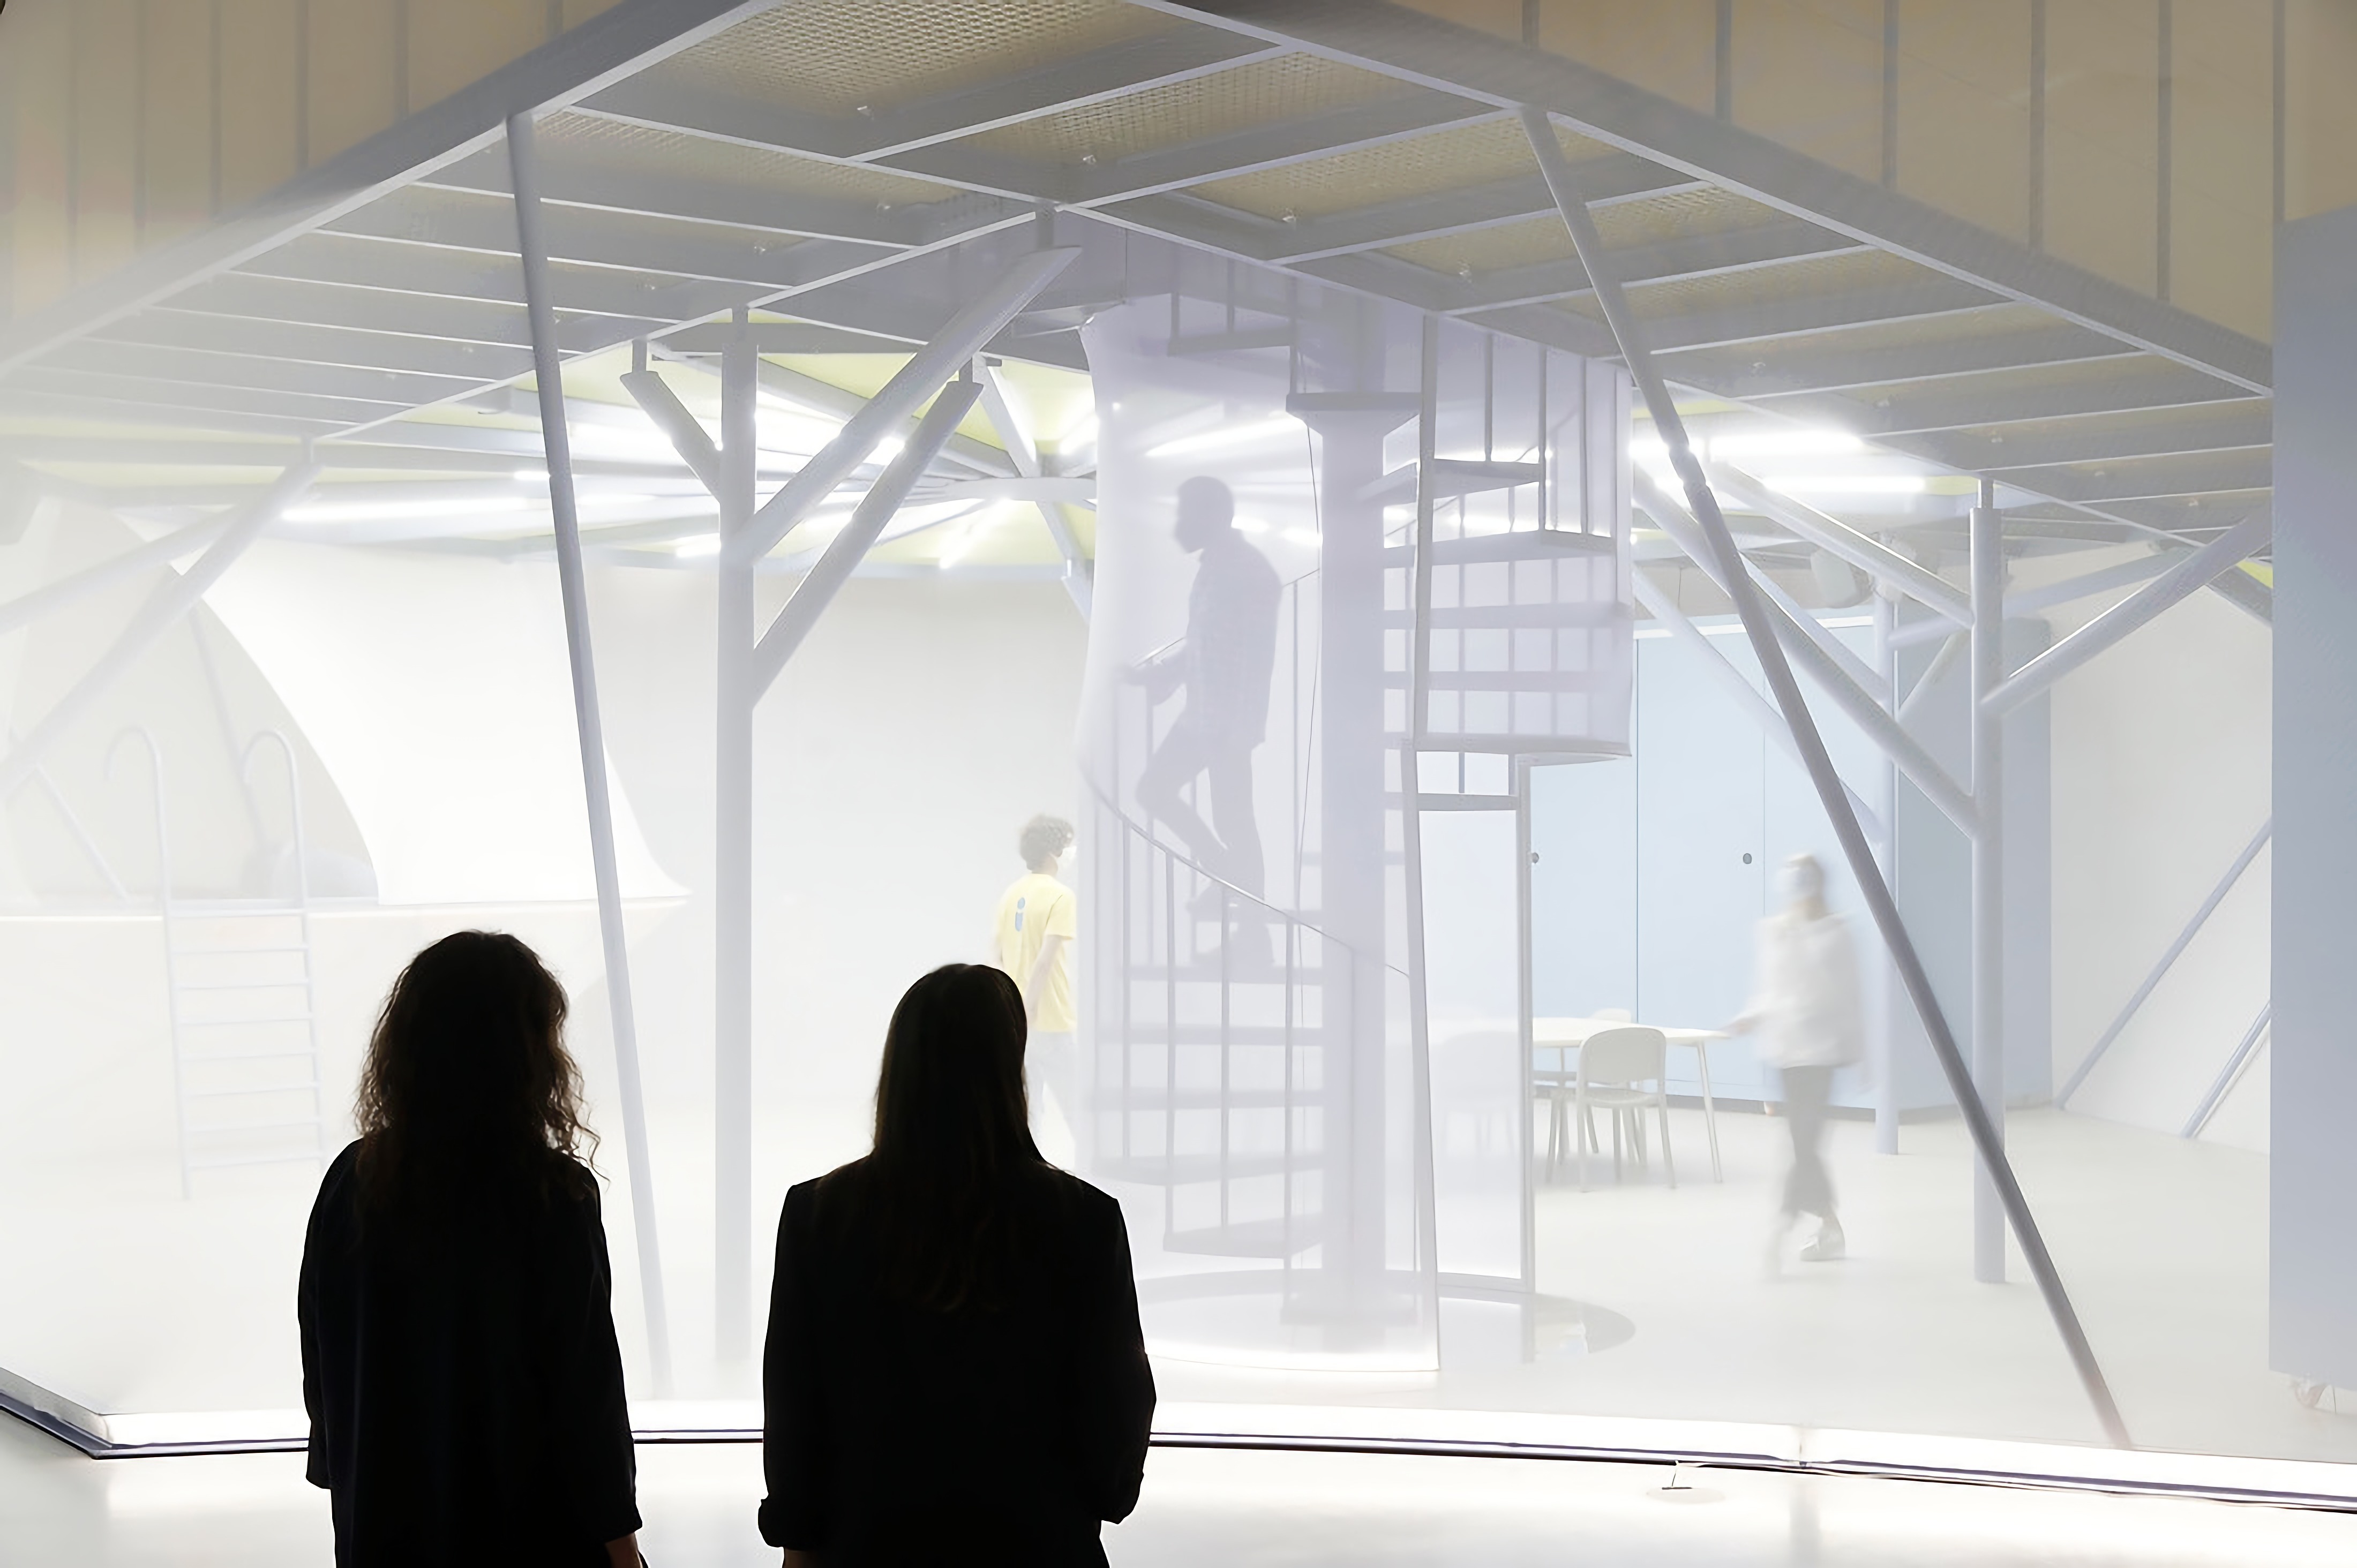 Beeline: A Temporary Installation That Maximizes the Function of the Museum